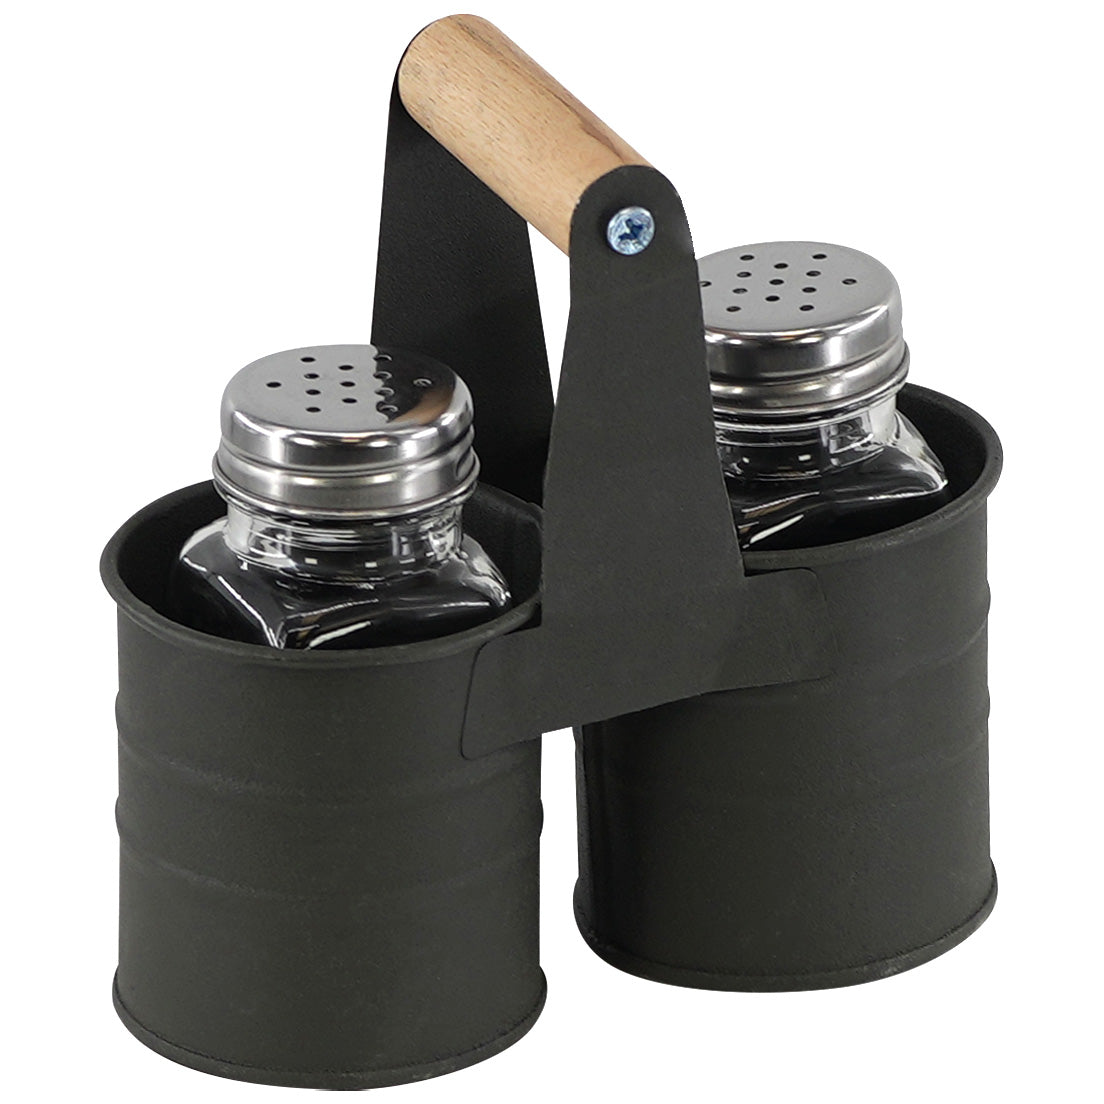 Salt And Pepper Shaker Set GEEZY - The Magic Toy Shop